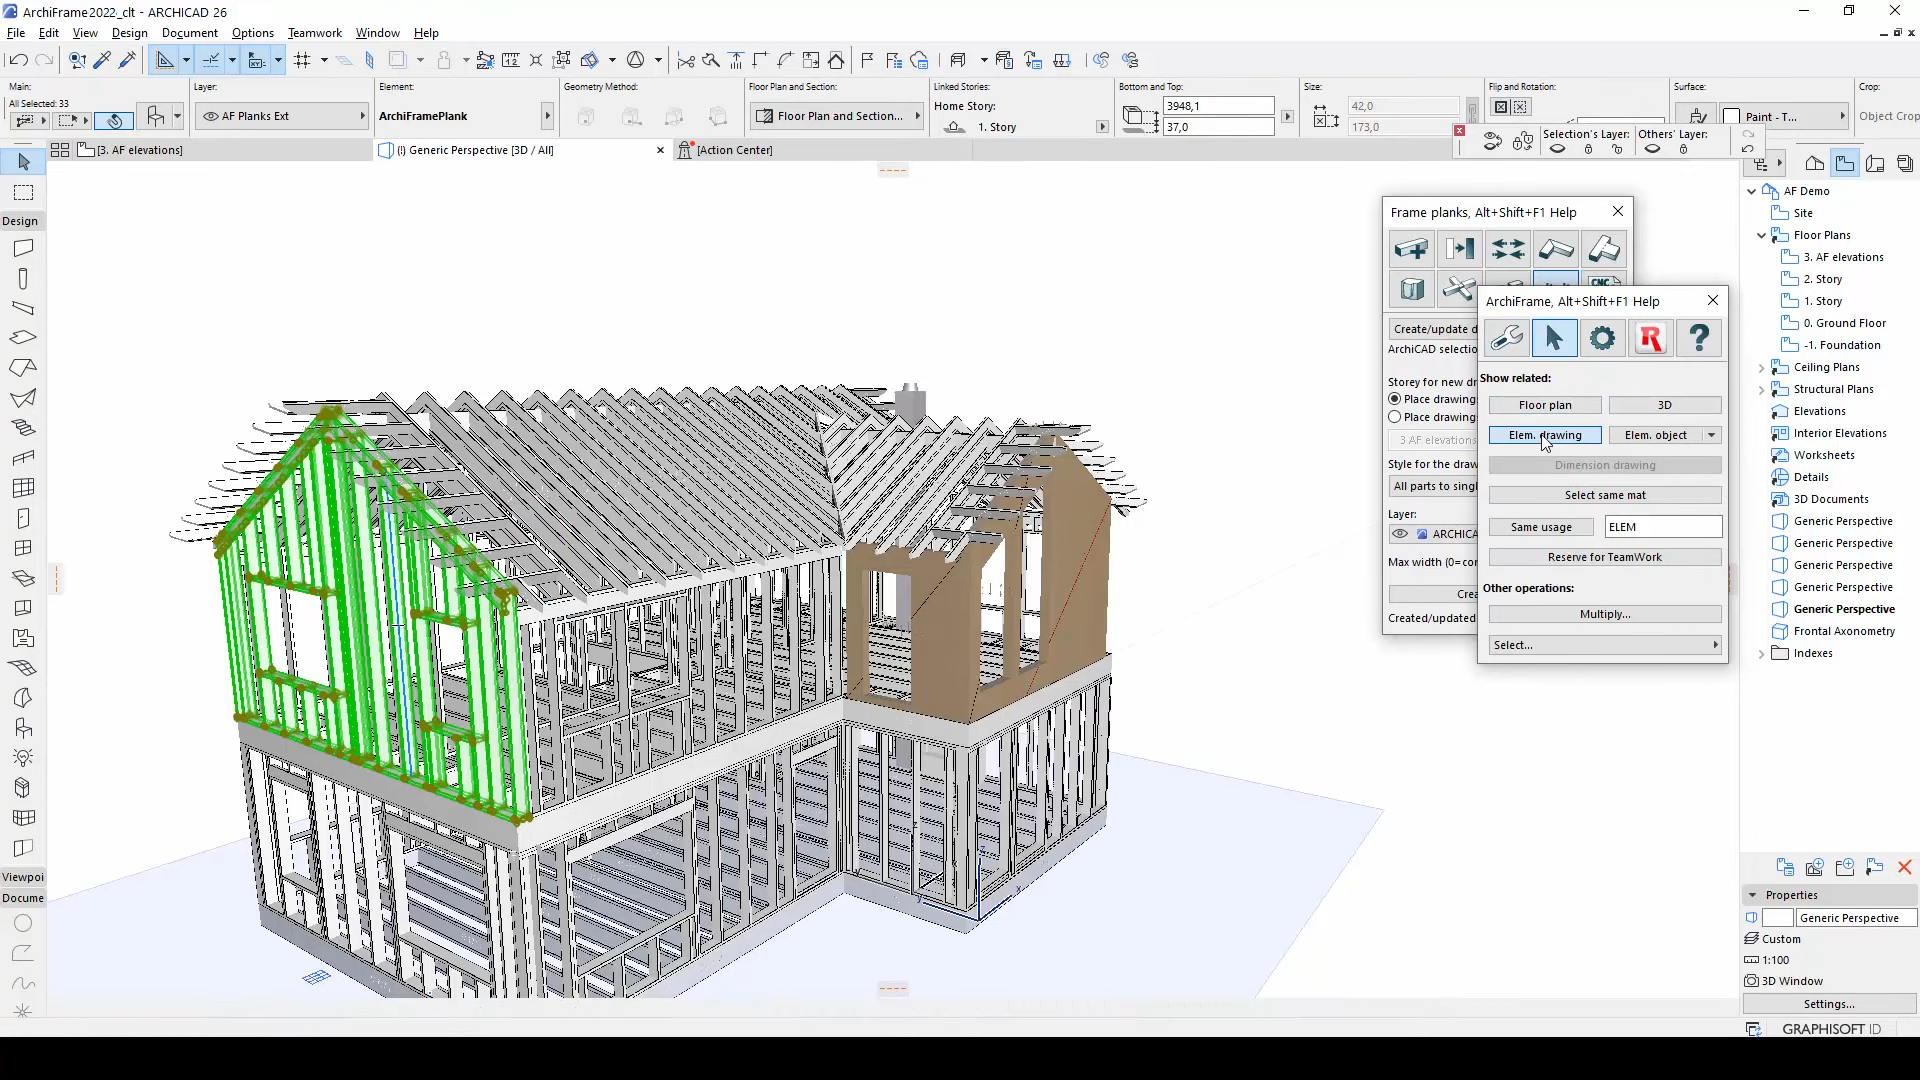 archicad 26 free download with crack 64-bit